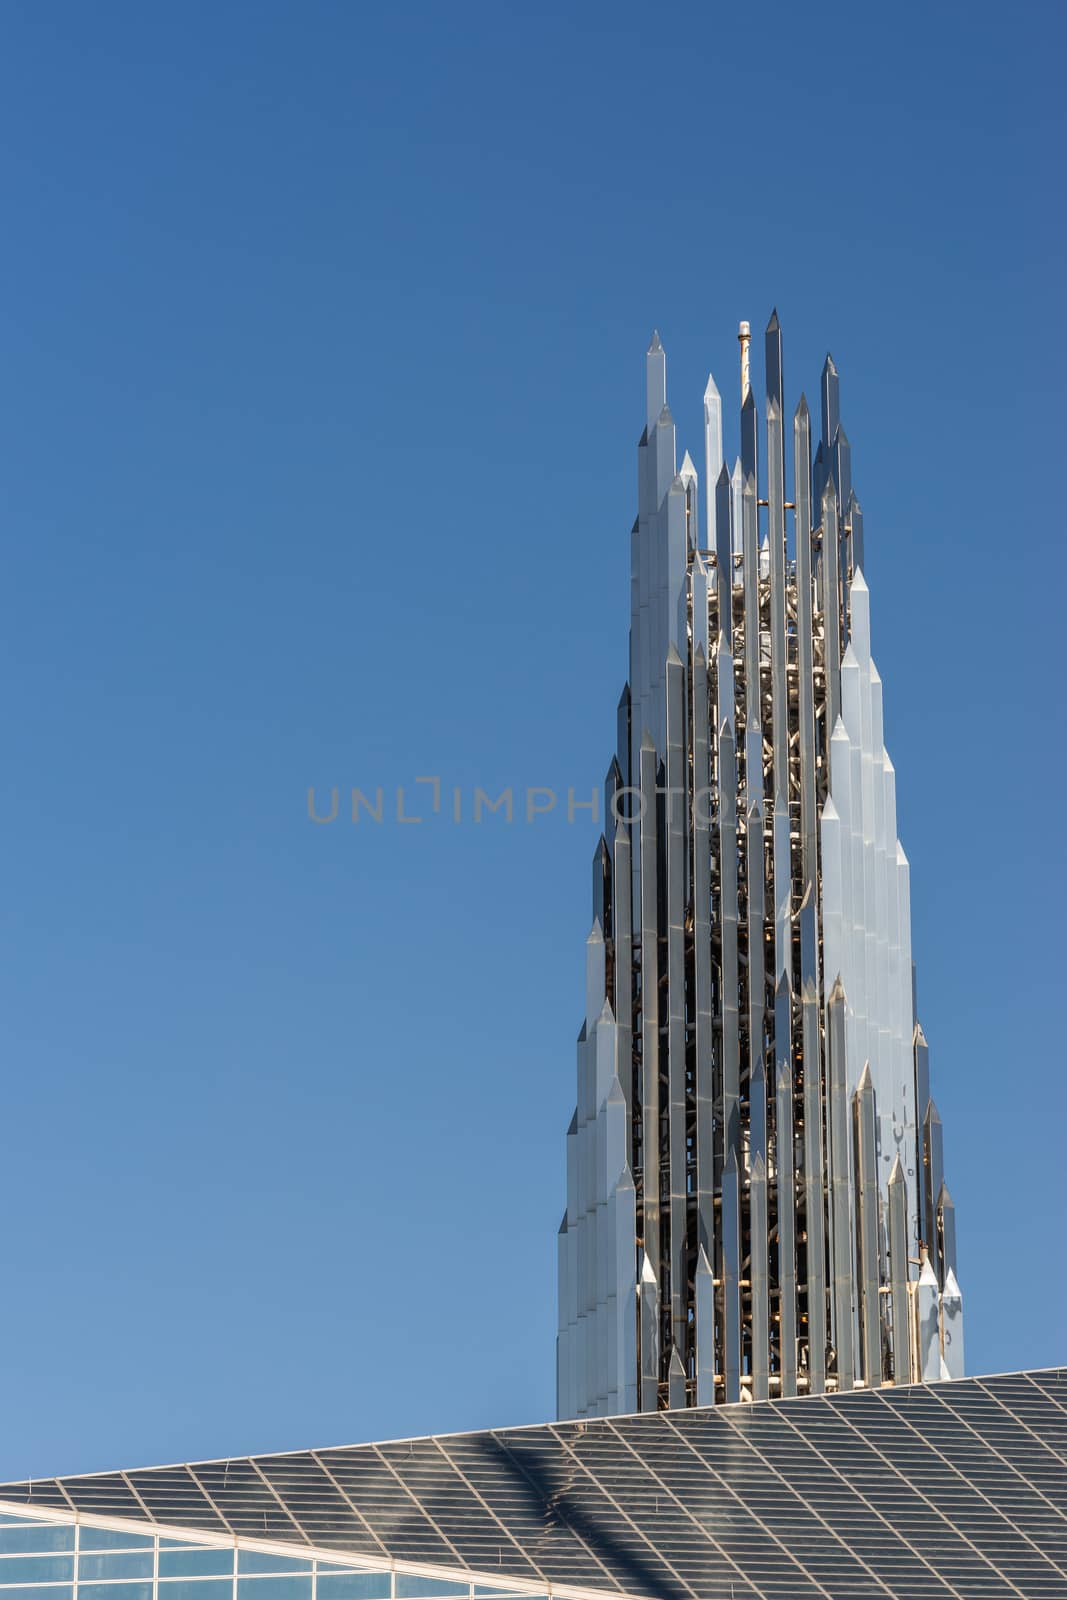 Crystal Crean Tower at Christ Cathedral in Garden Grove, Califor by Claudine